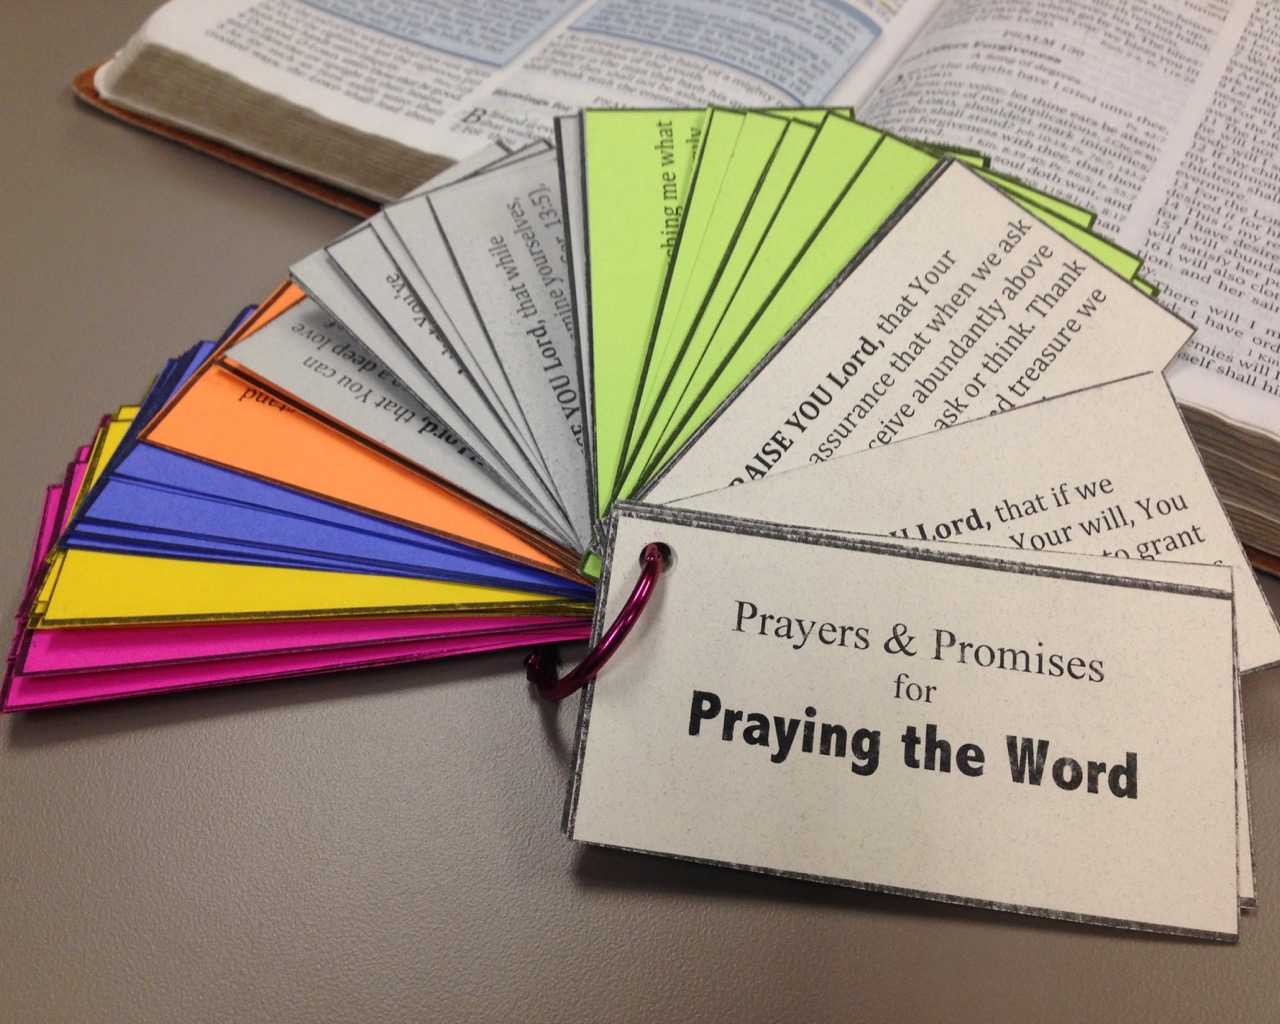 Praying The Word: Prayer & Promise Cards | Revival & Reformation Throughout Prayer Card Template For Word